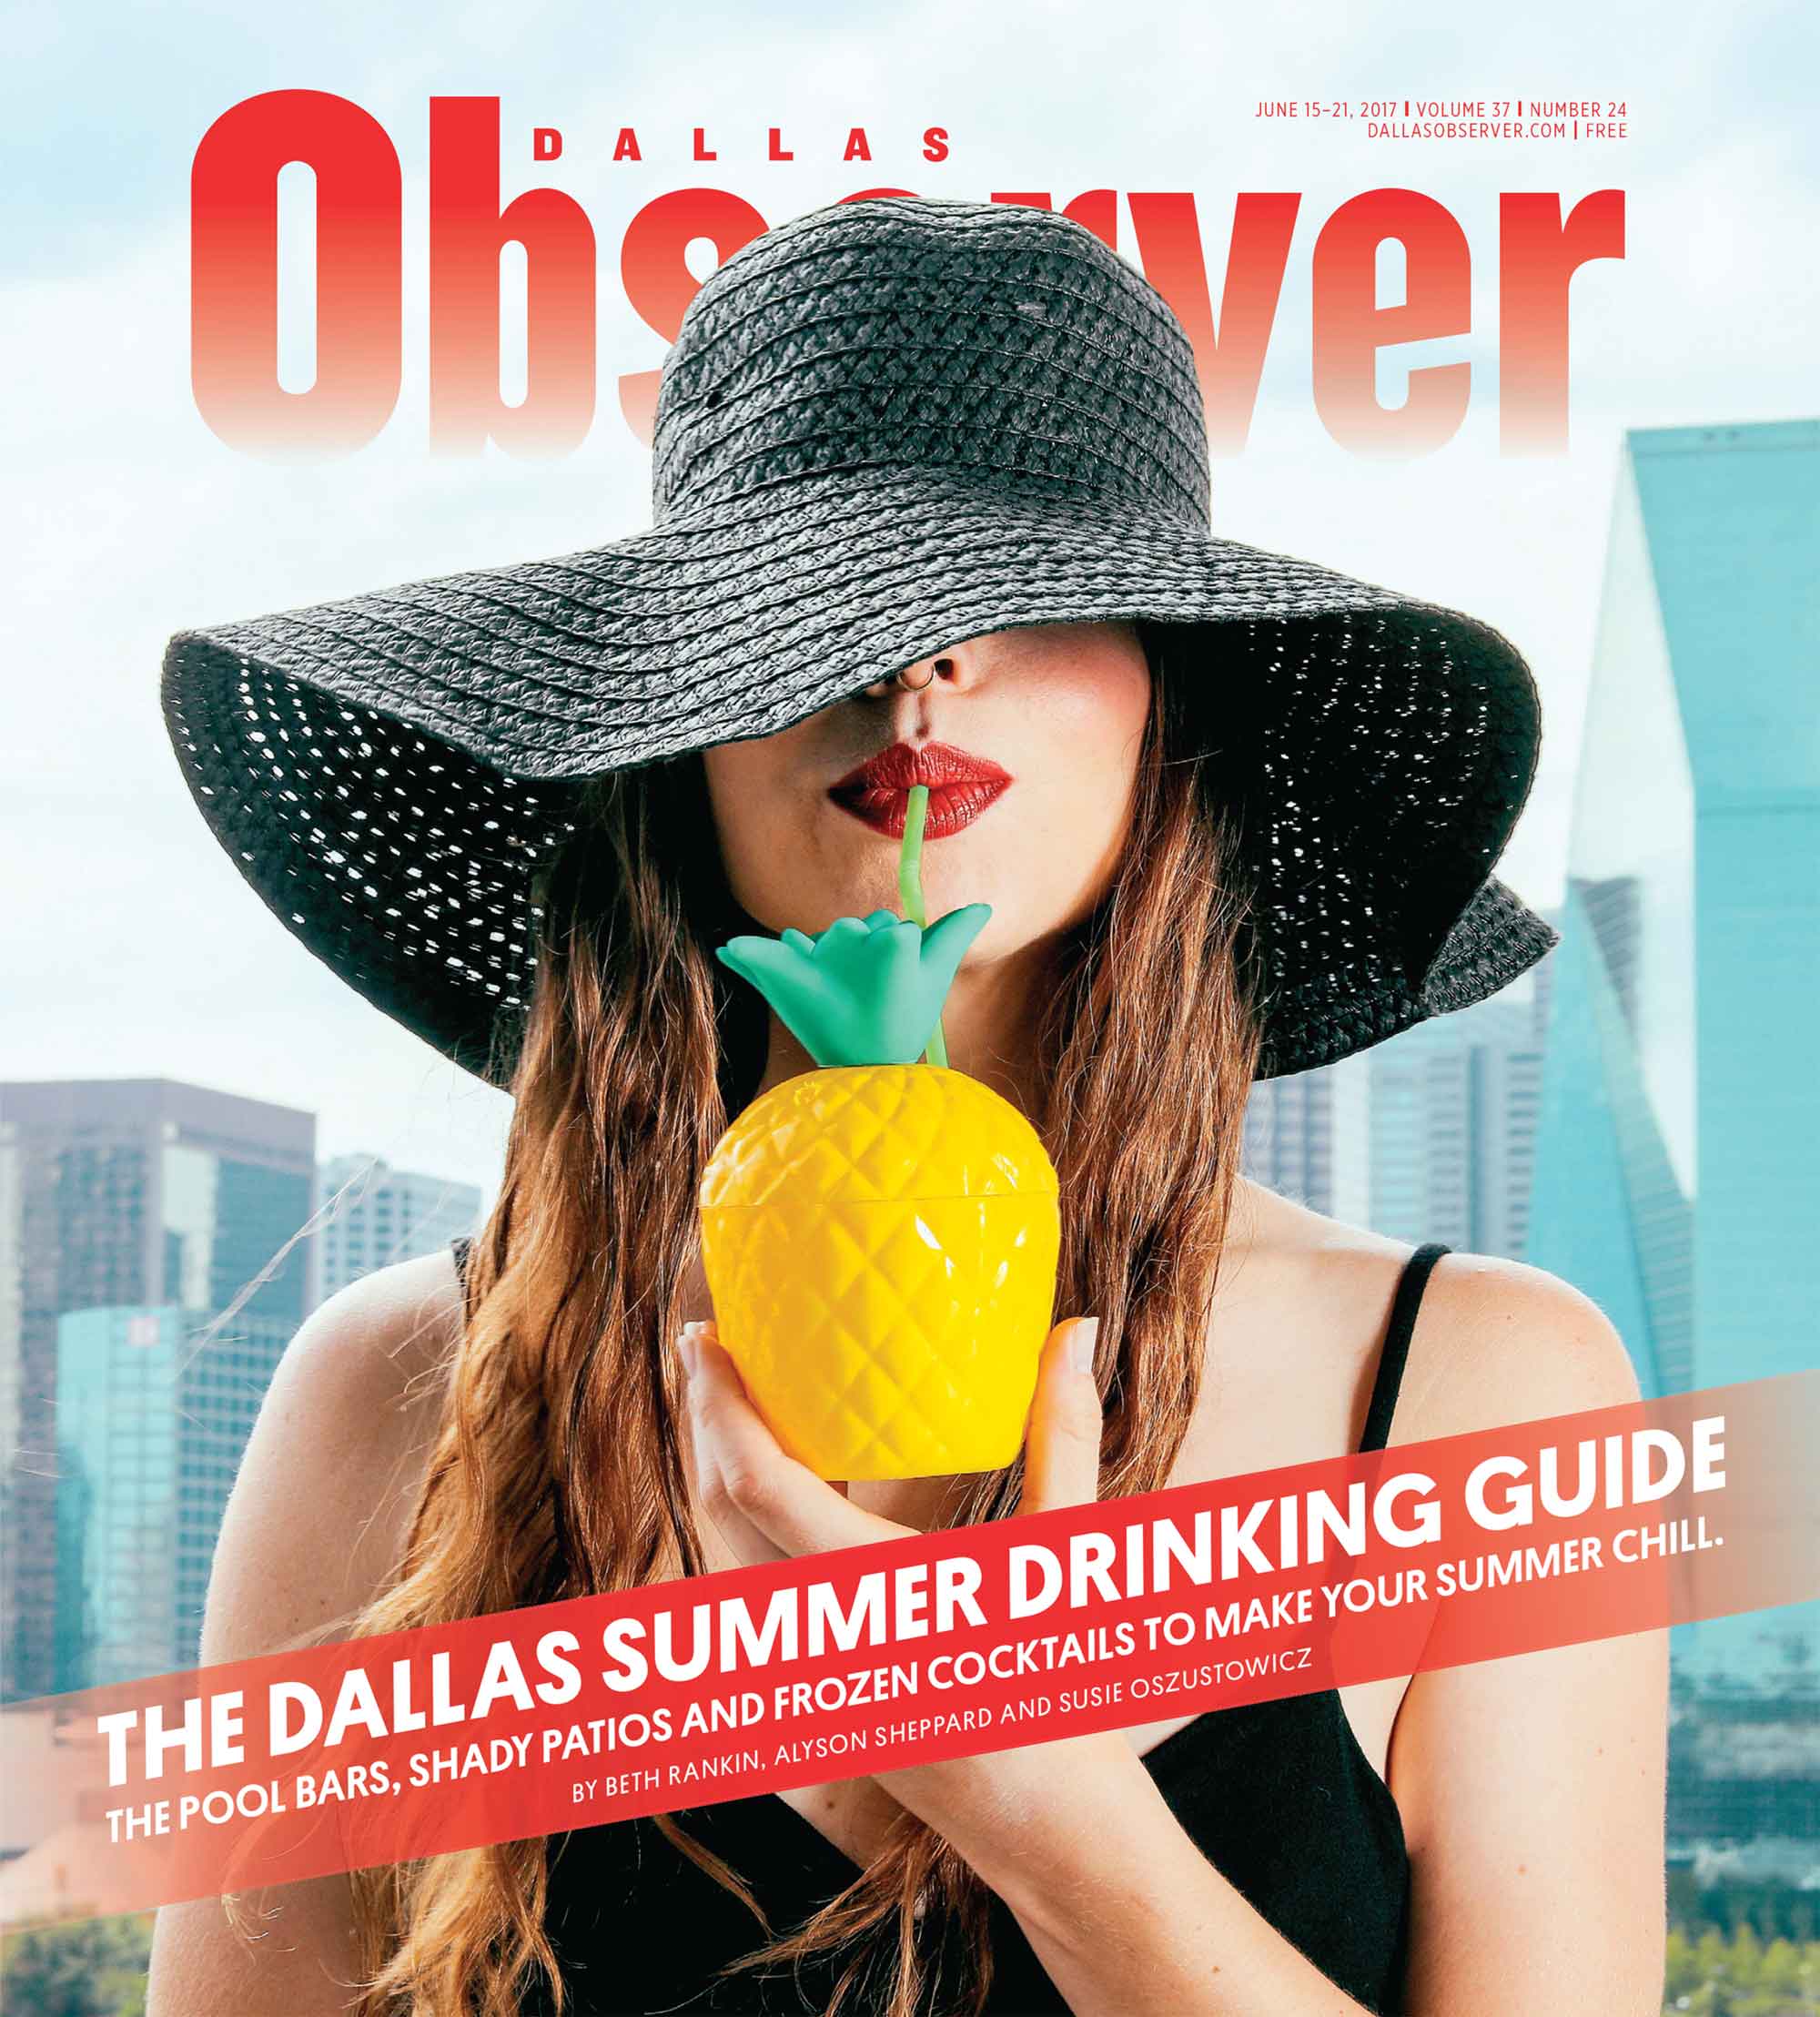 The Dallas Summer Drinking Guide